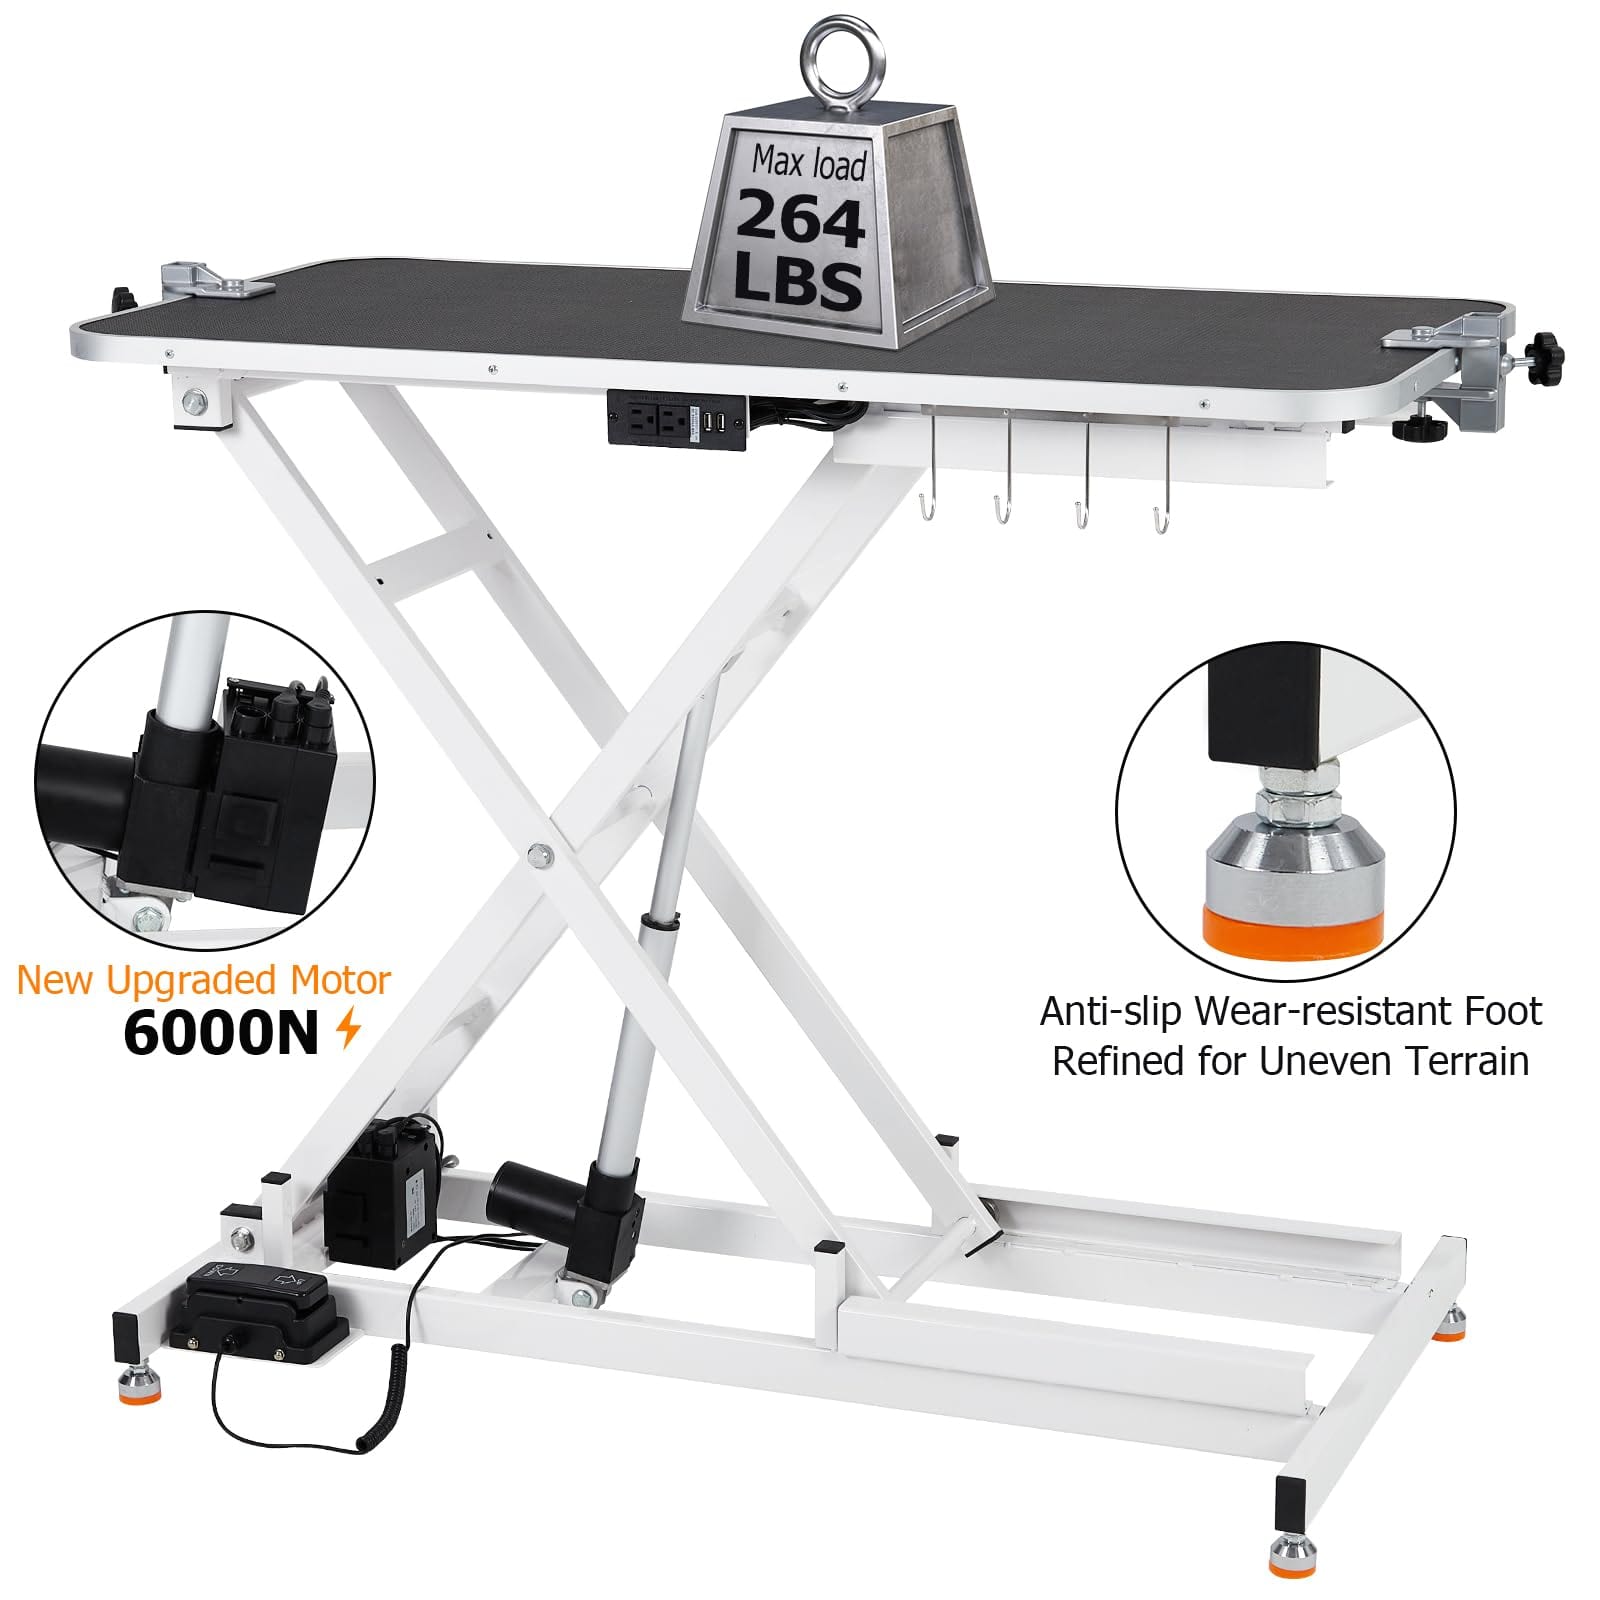 9.4"-39.4" Electric Lift Grooming Table with Gantry Crane Set